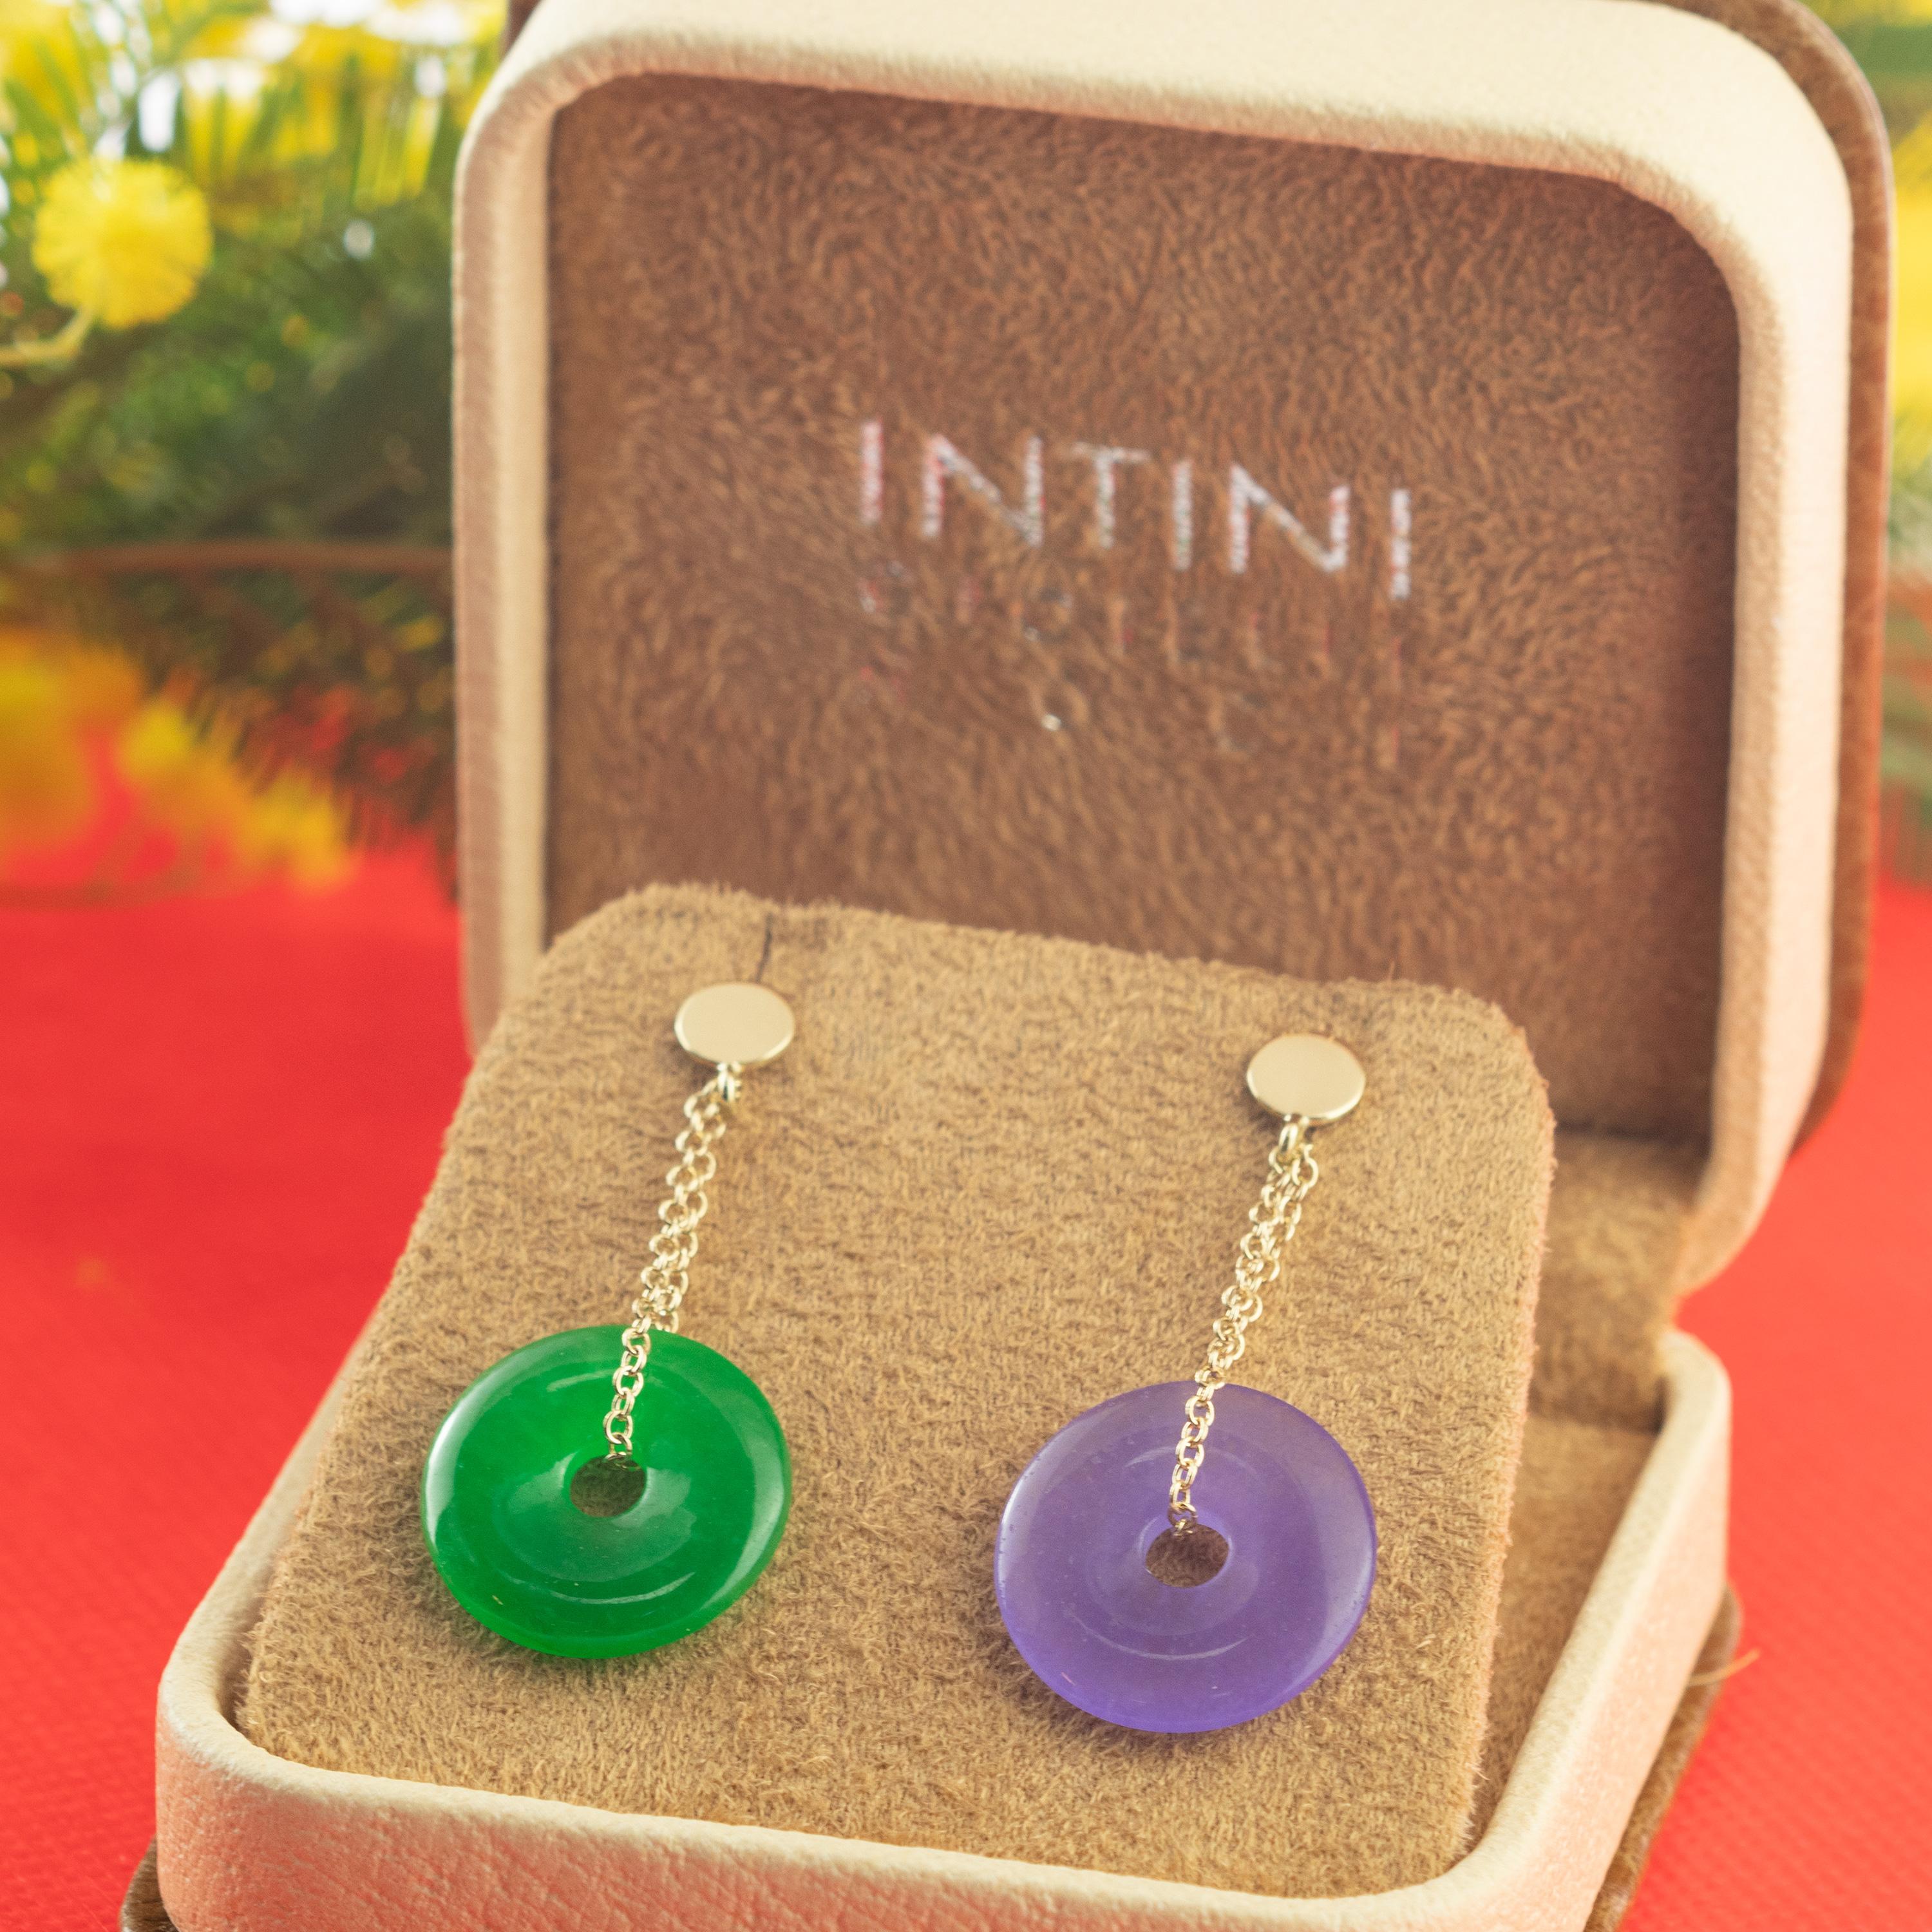 An enchanted round purple / violet and green quartz donut-shaped earrings holded by 18 karat yellow gold chains. Modern designs full of a vivid color an a voluminous shapes, resulting in bold, free-spirited pieces with a charming elegance. Drop and